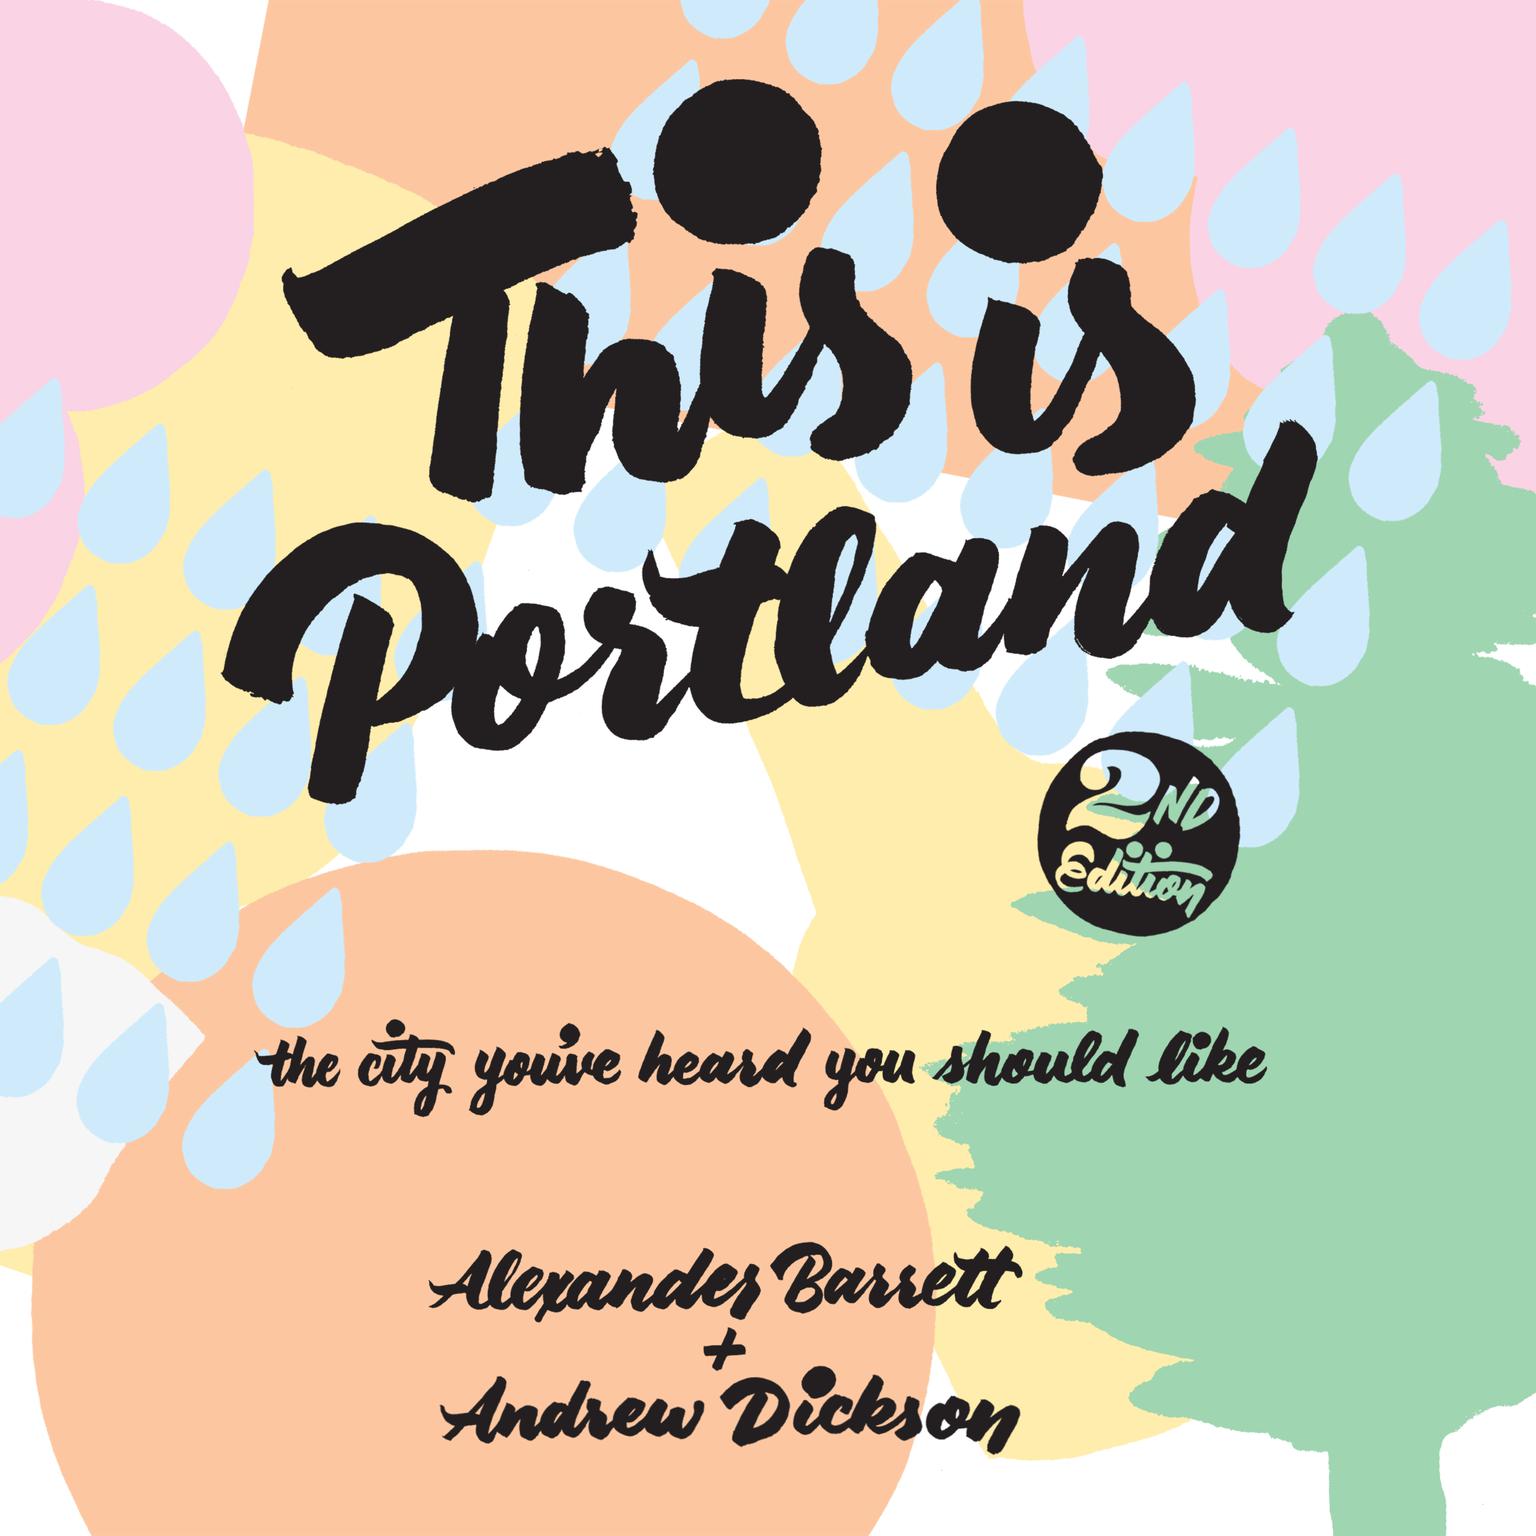 This Is Portland, 2nd Edition: The City You’ve Heard You Should Like Audiobook, by Alexander Barrett